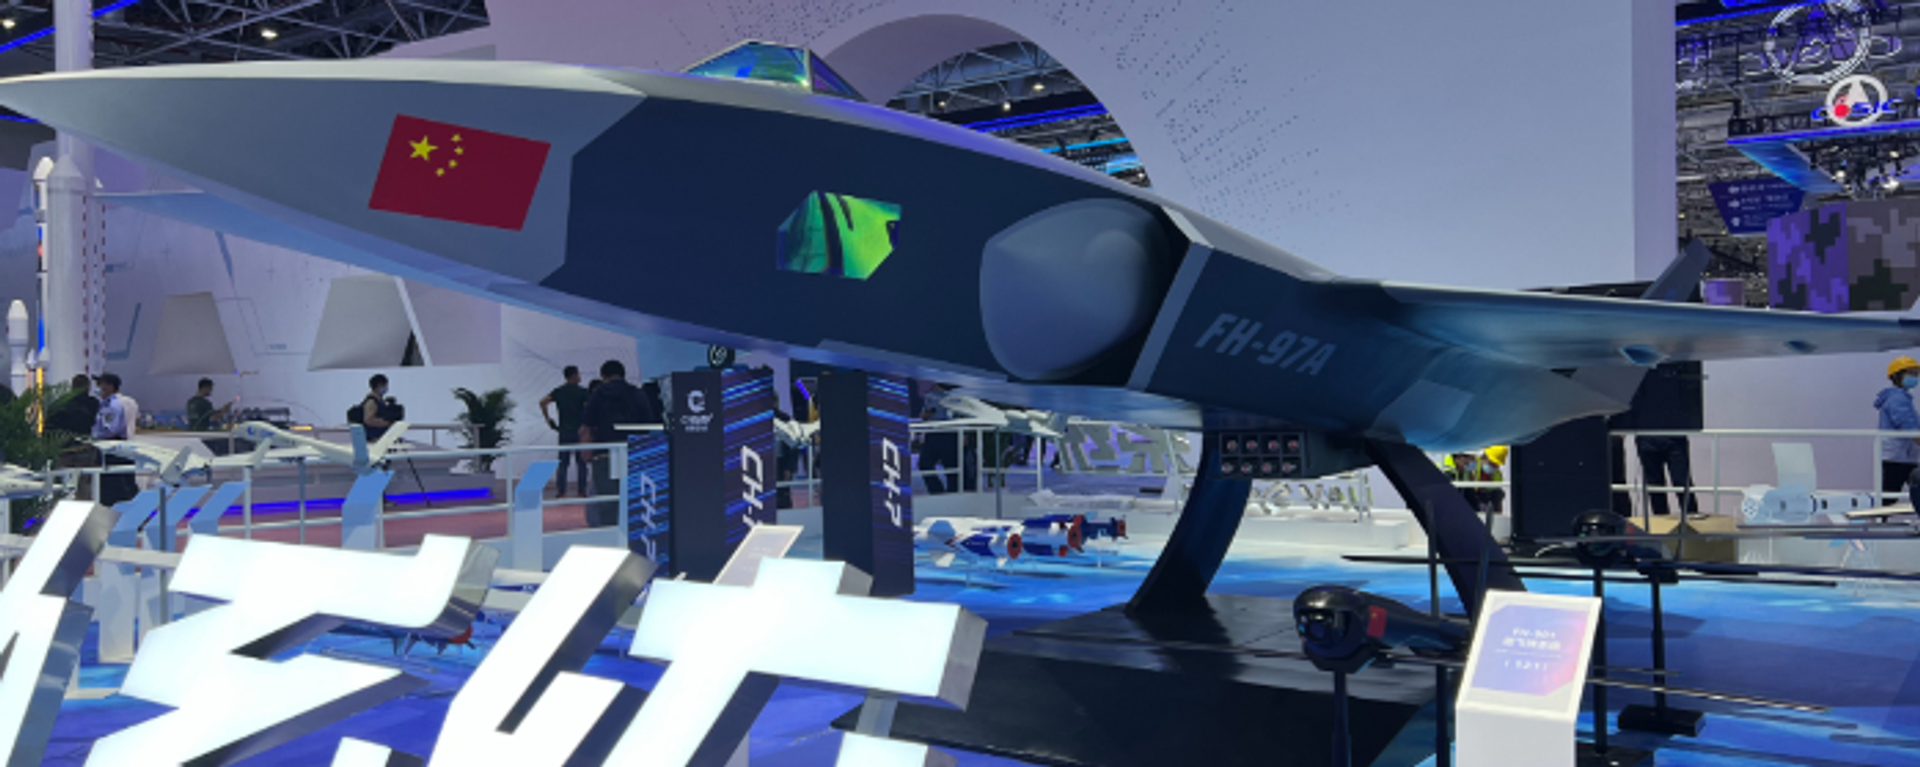 An FH-97A loyal wingman drone is exhibited for the first time at the Airshow China 2022, which is held from November 8 to 13 in Zhuhai, South China's Guangdong Province.  - Sputnik International, 1920, 08.11.2022